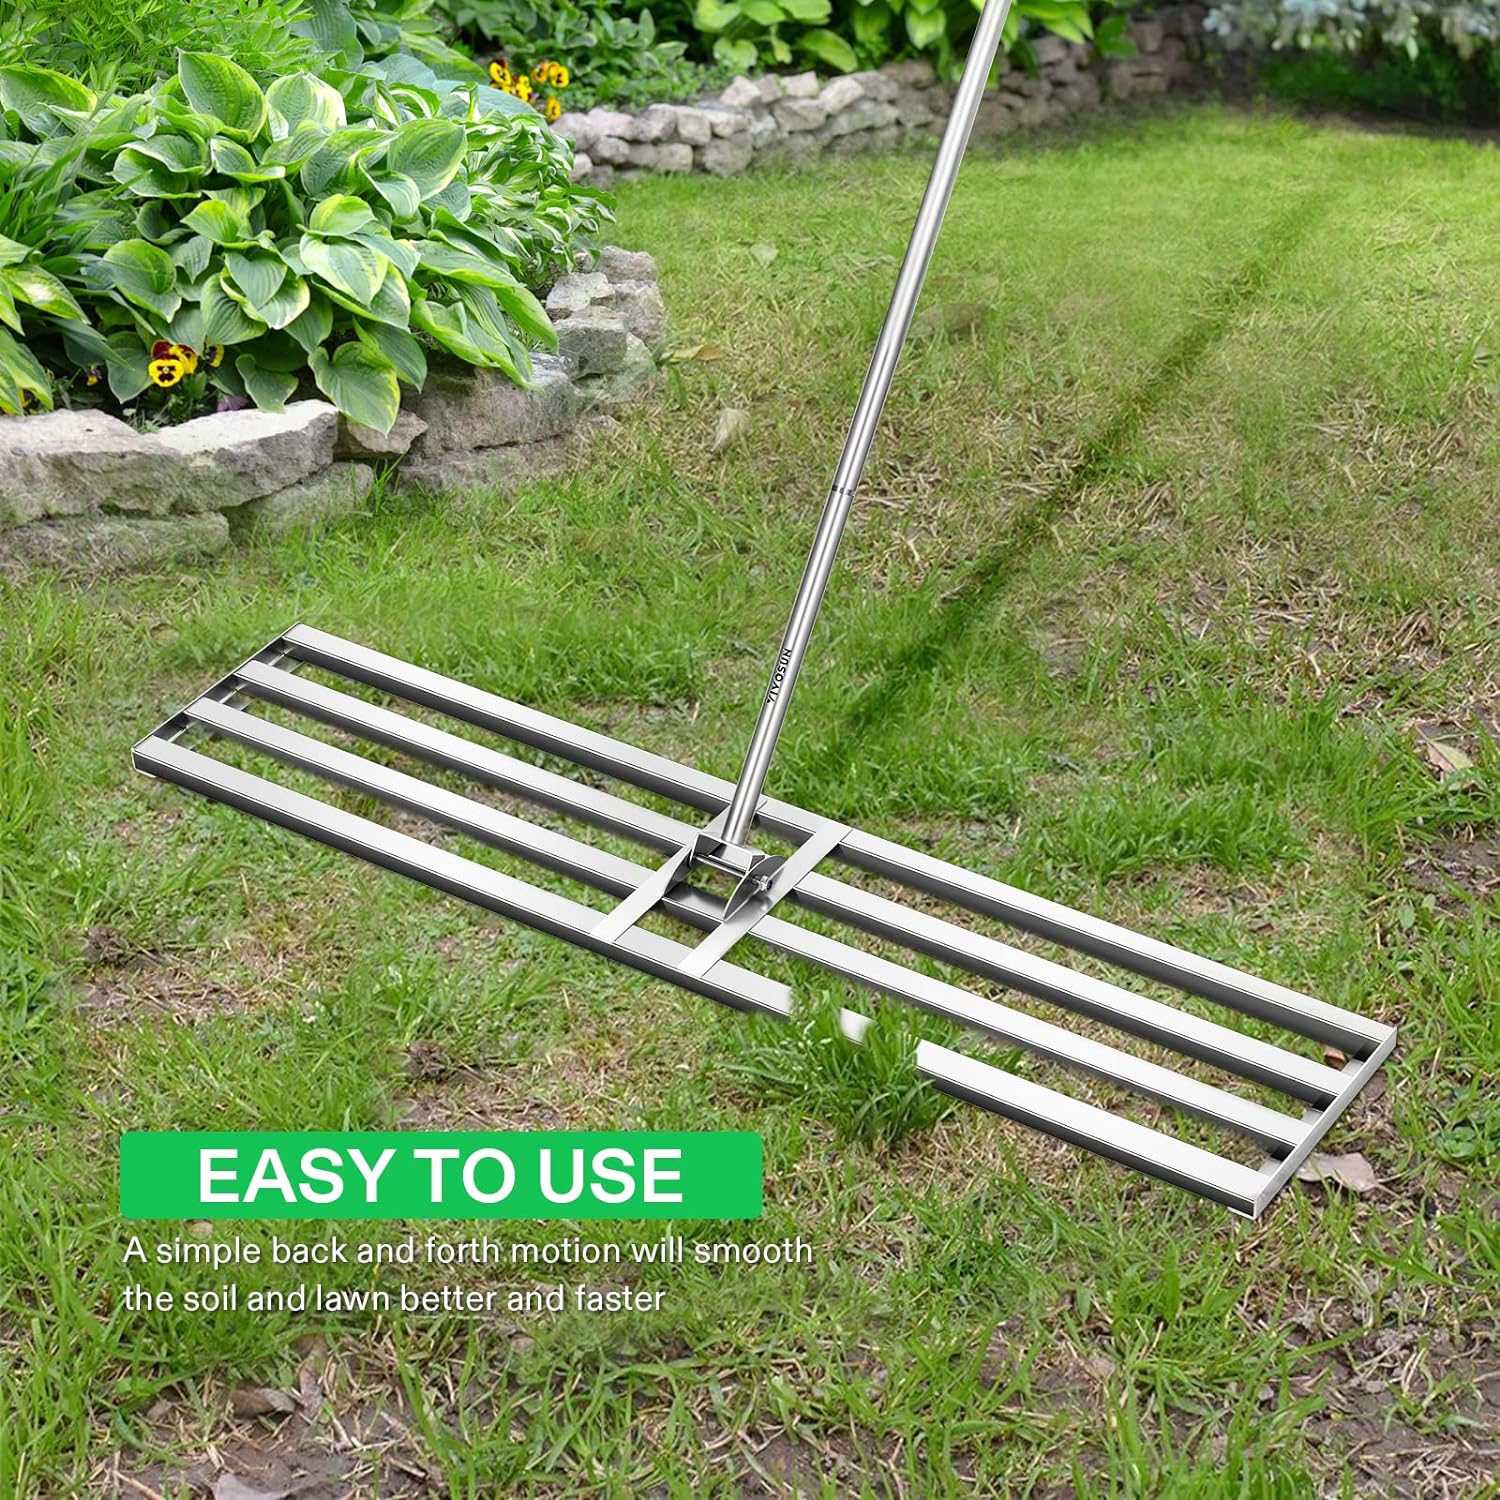 VIVOSUN 48" Lawn Leveling Rake, 48" x 10" x 78" Heavy-Duty Stainless Steel Lawn Leveler with 7FT Adjuatble Long Handle for High Effect, Metal Levelawn for Smooth Soil, Rustproof Rakes for Garden Yard